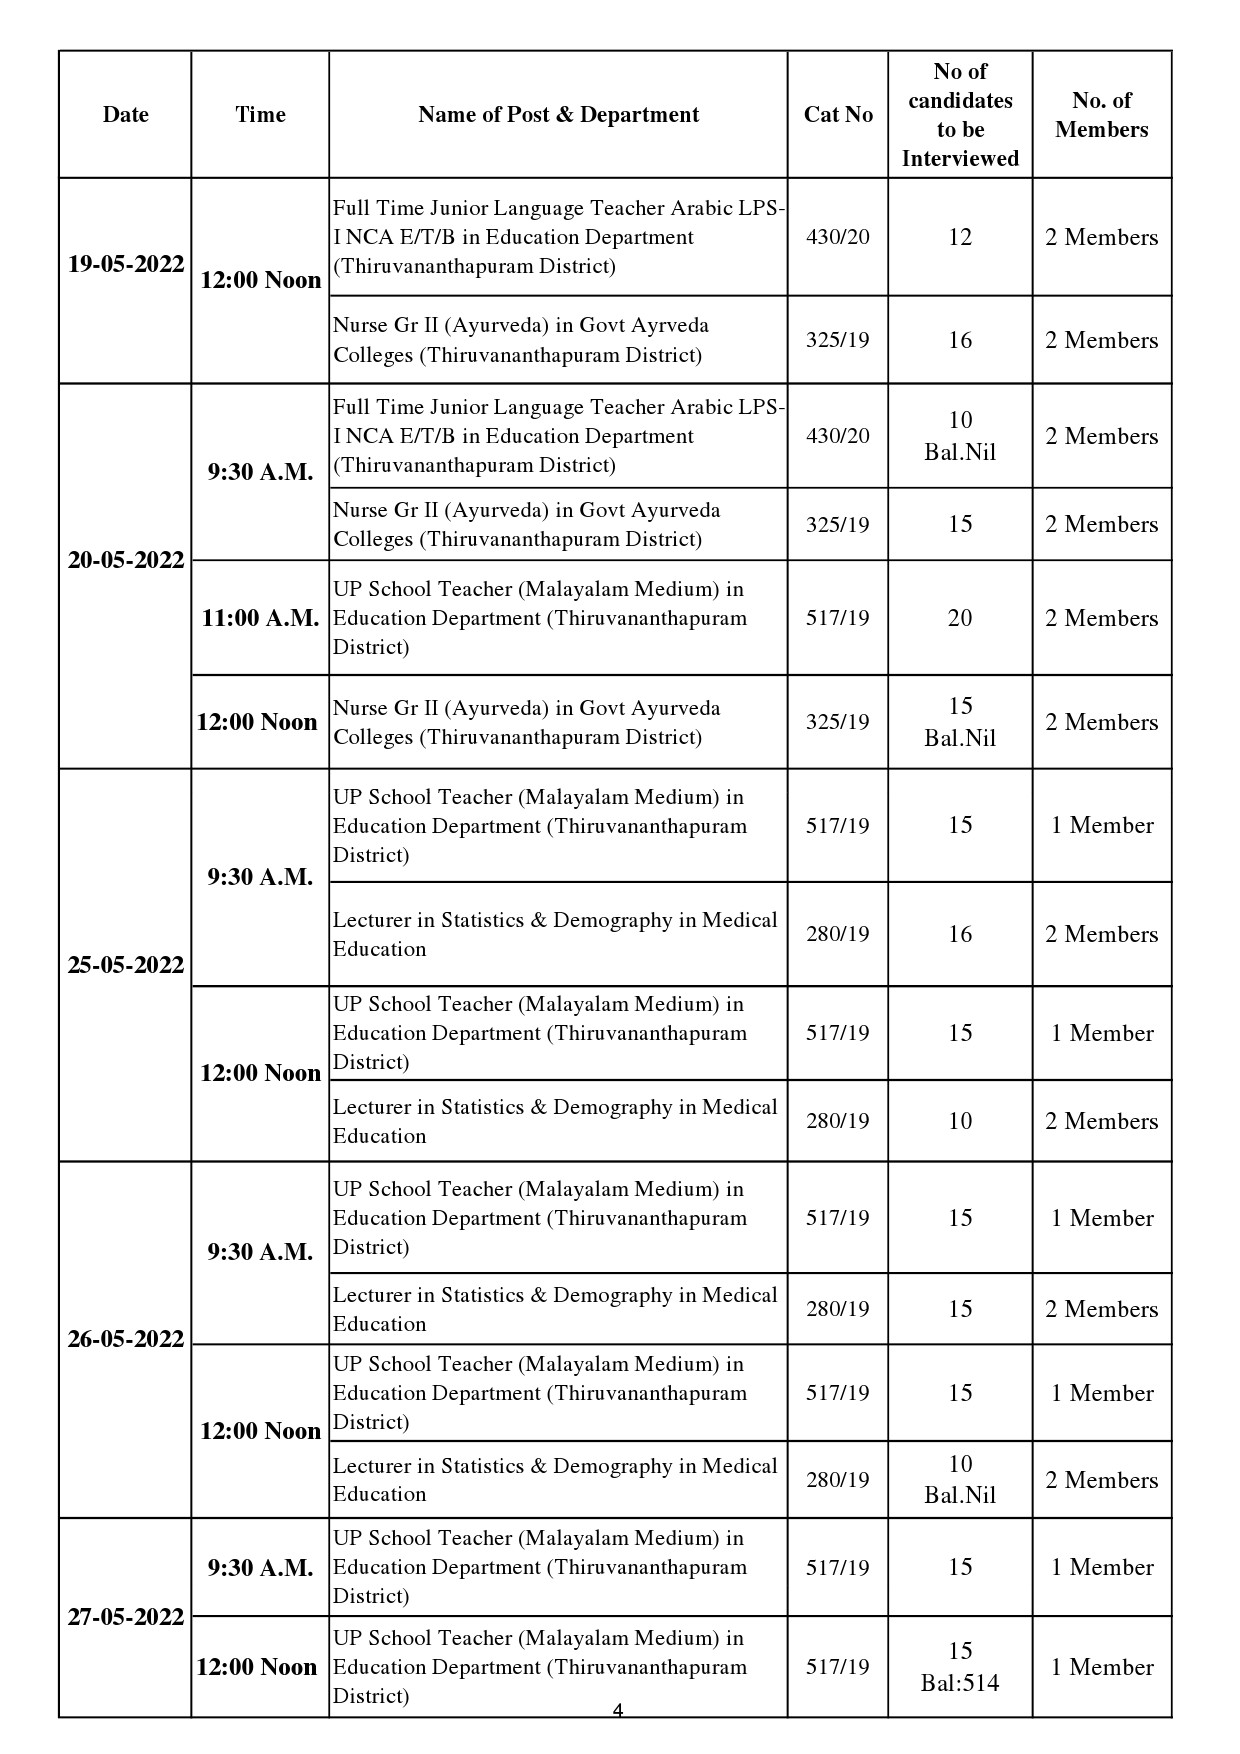 KPSC INTERVIEW PROGRAMME FOR THE MONTH OF MAY 2022 - Notification Image 4